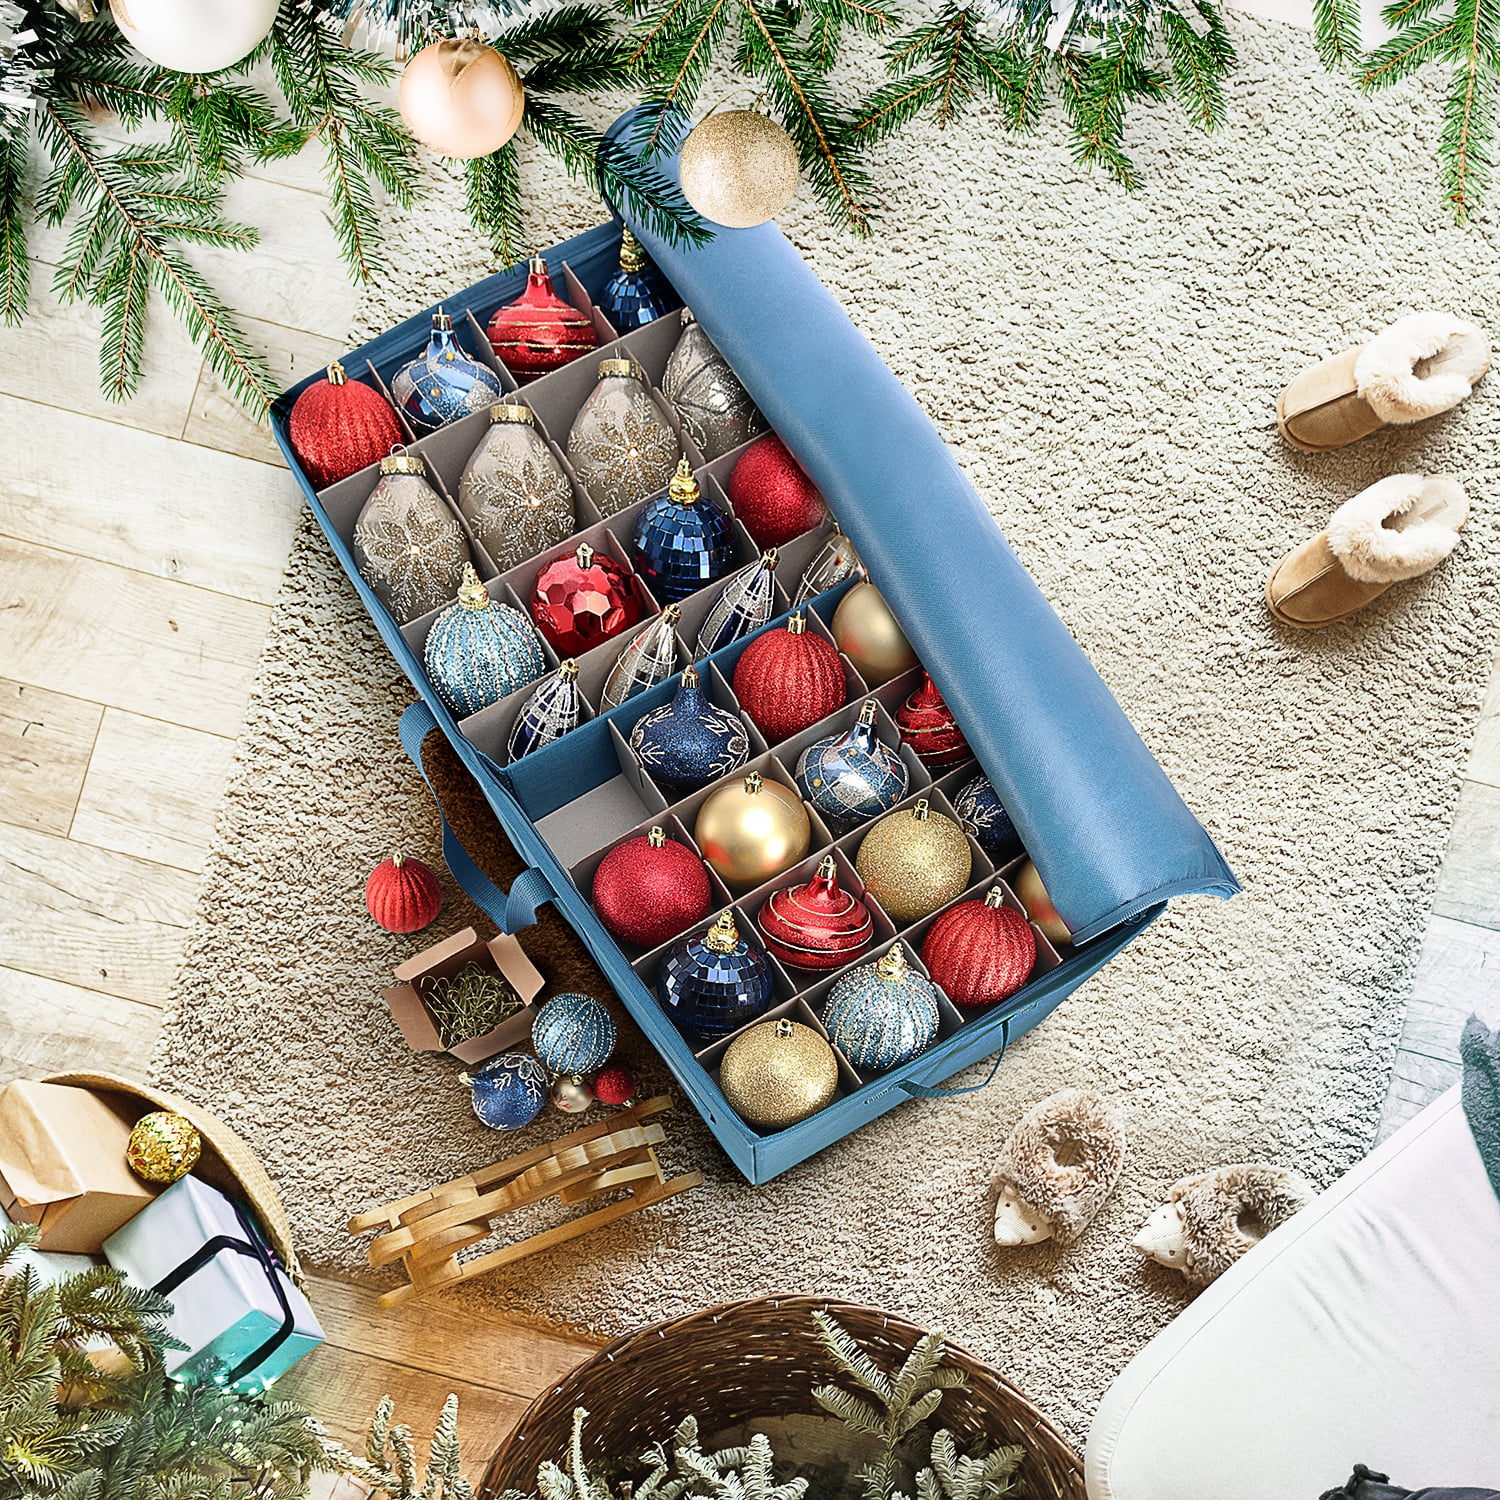 Hearth & Harbor Pack of 2 Large Christmas Ornament Storage Box with Adjustable Dividers, POLYESTER, Blue